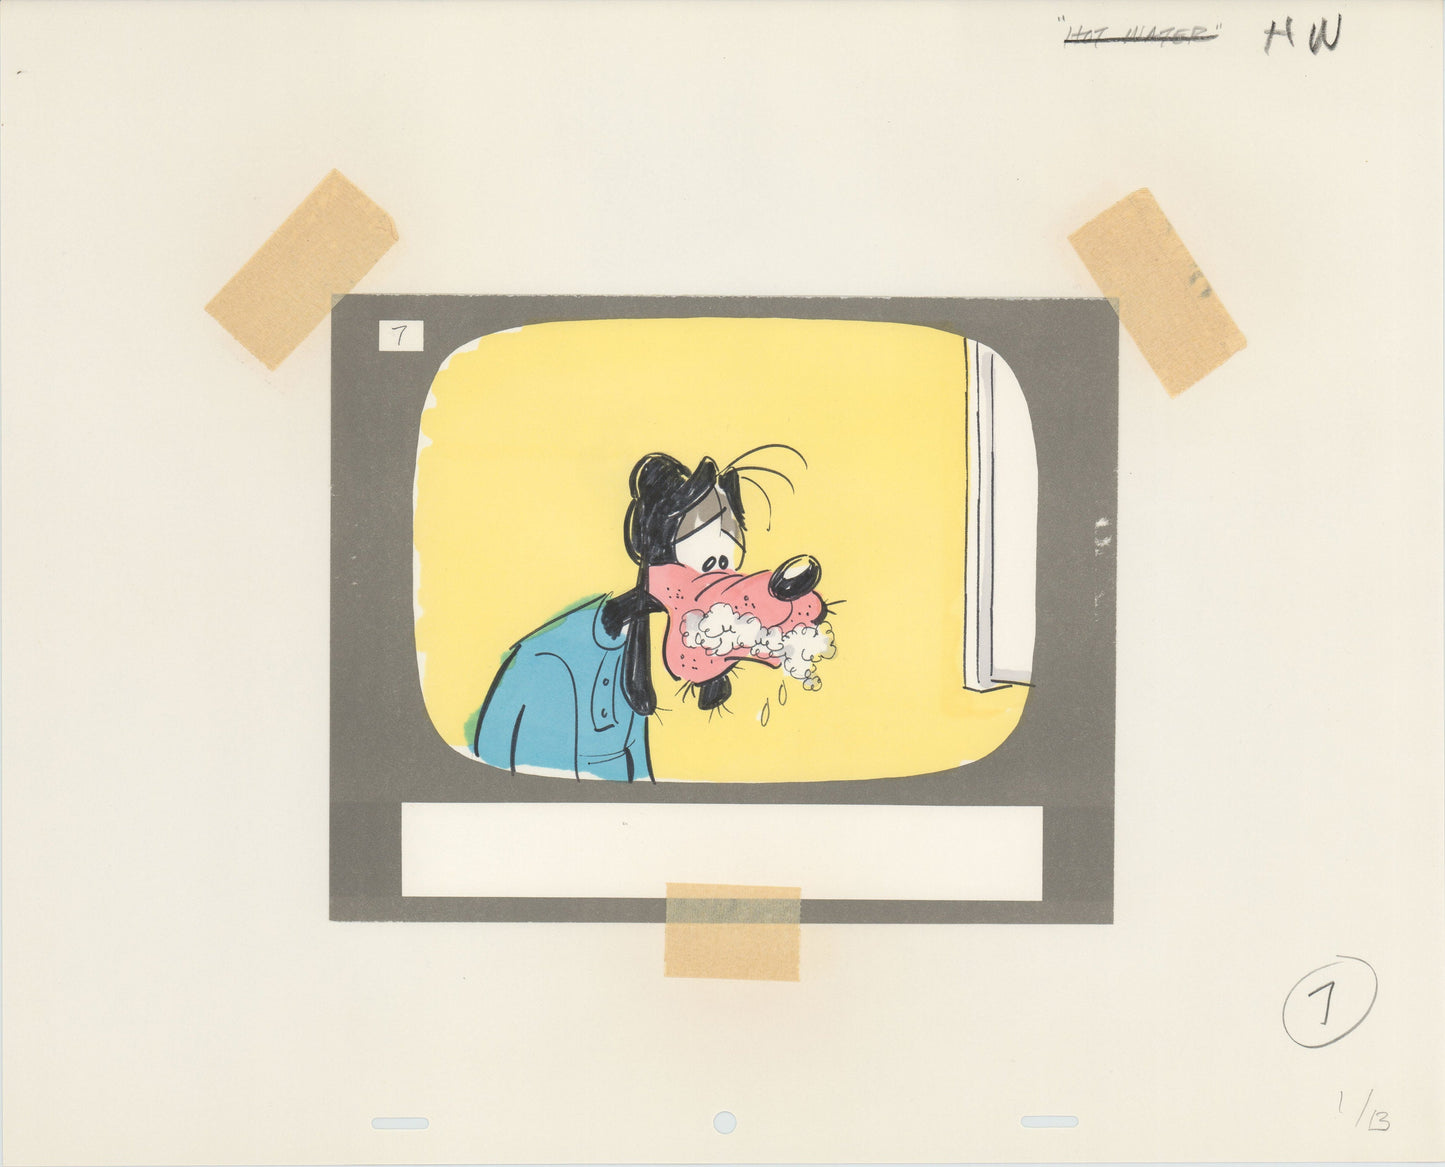 Goofy Willie Ito Hand-drawn Walt Disney Production Animation Storyboard 1970's or 1980's 196 from "Hot Water" Filmstrip